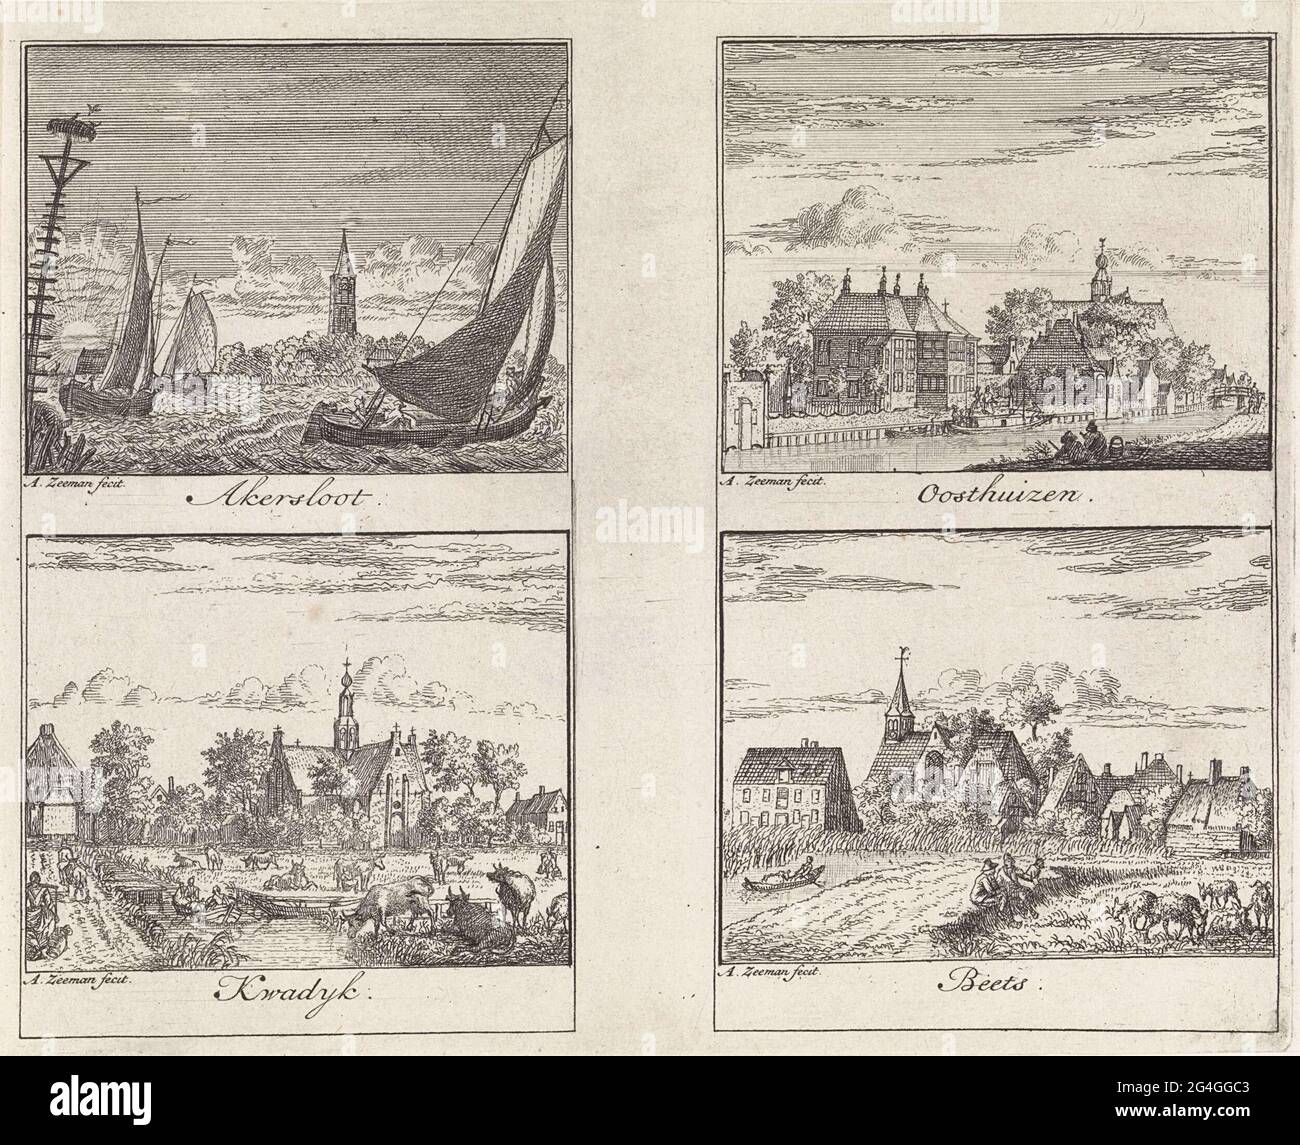 . Four performances on a leaf. Top left: View of the village of Akersloot with sailing ships on the Alkmaardermeer in the foreground. Bottom left: View of the village of Kwadijk. At the top right: View of the village of Oosthuizen. Bottom right: View of the village of Beets. Stock Photo